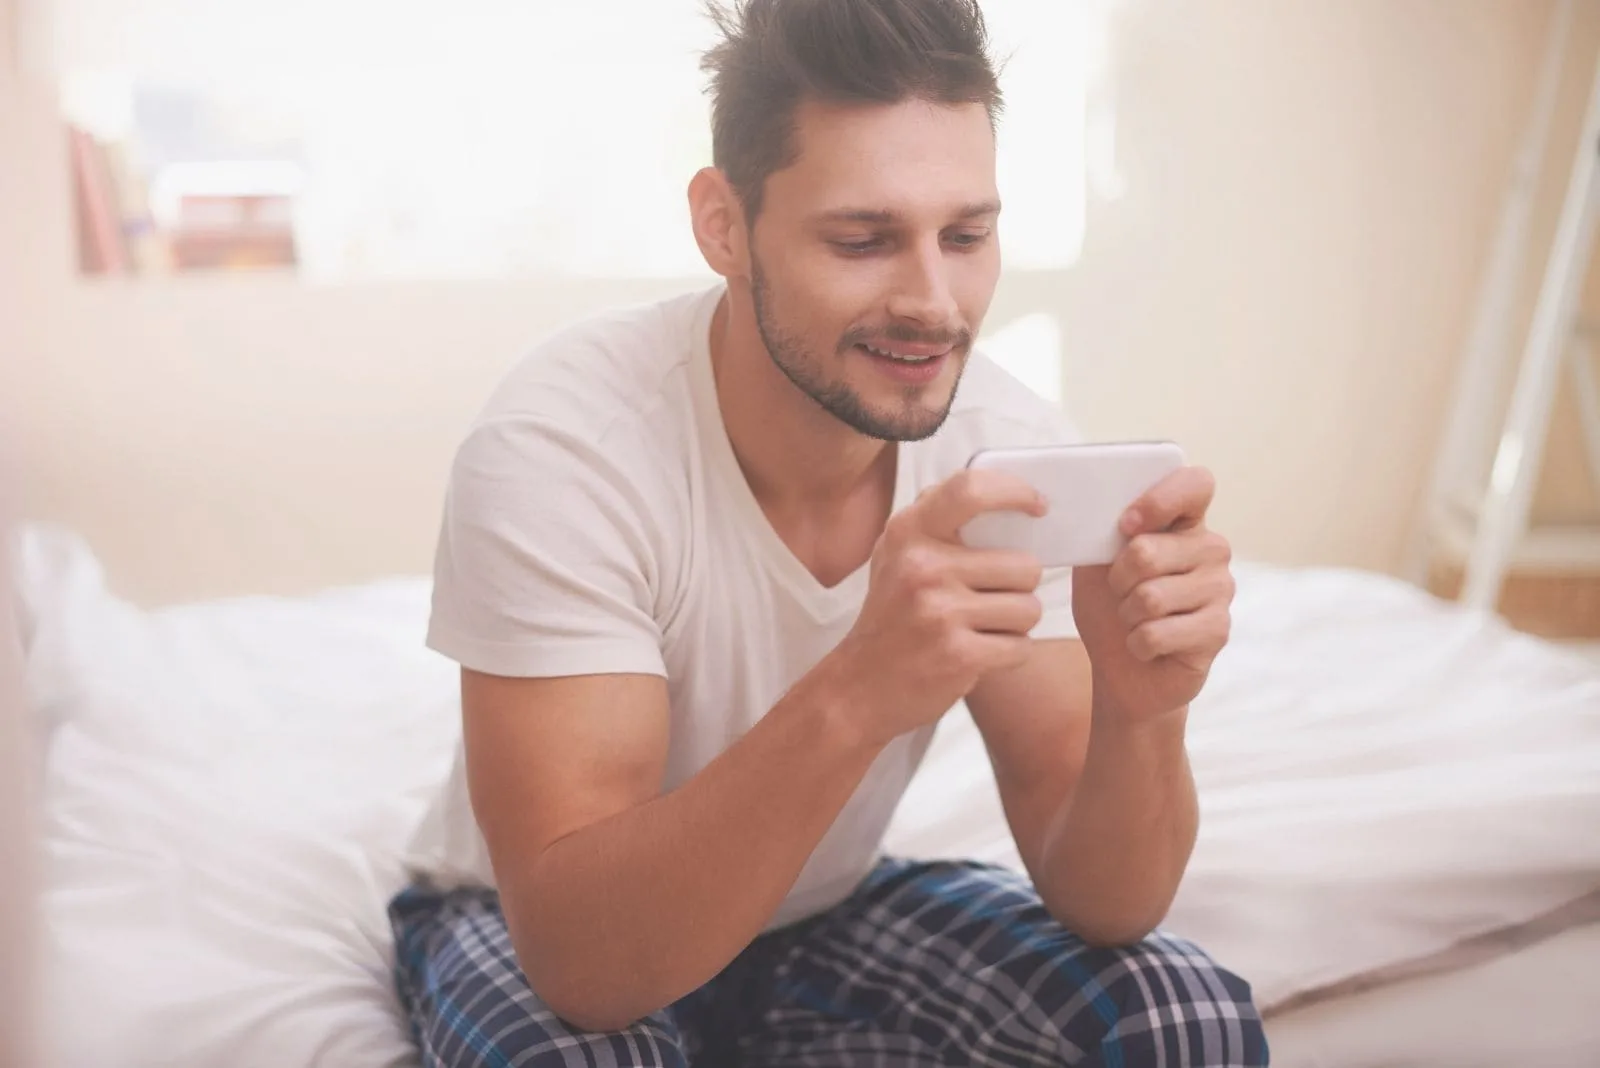 man texting up friends in bed smiling and using smartphone